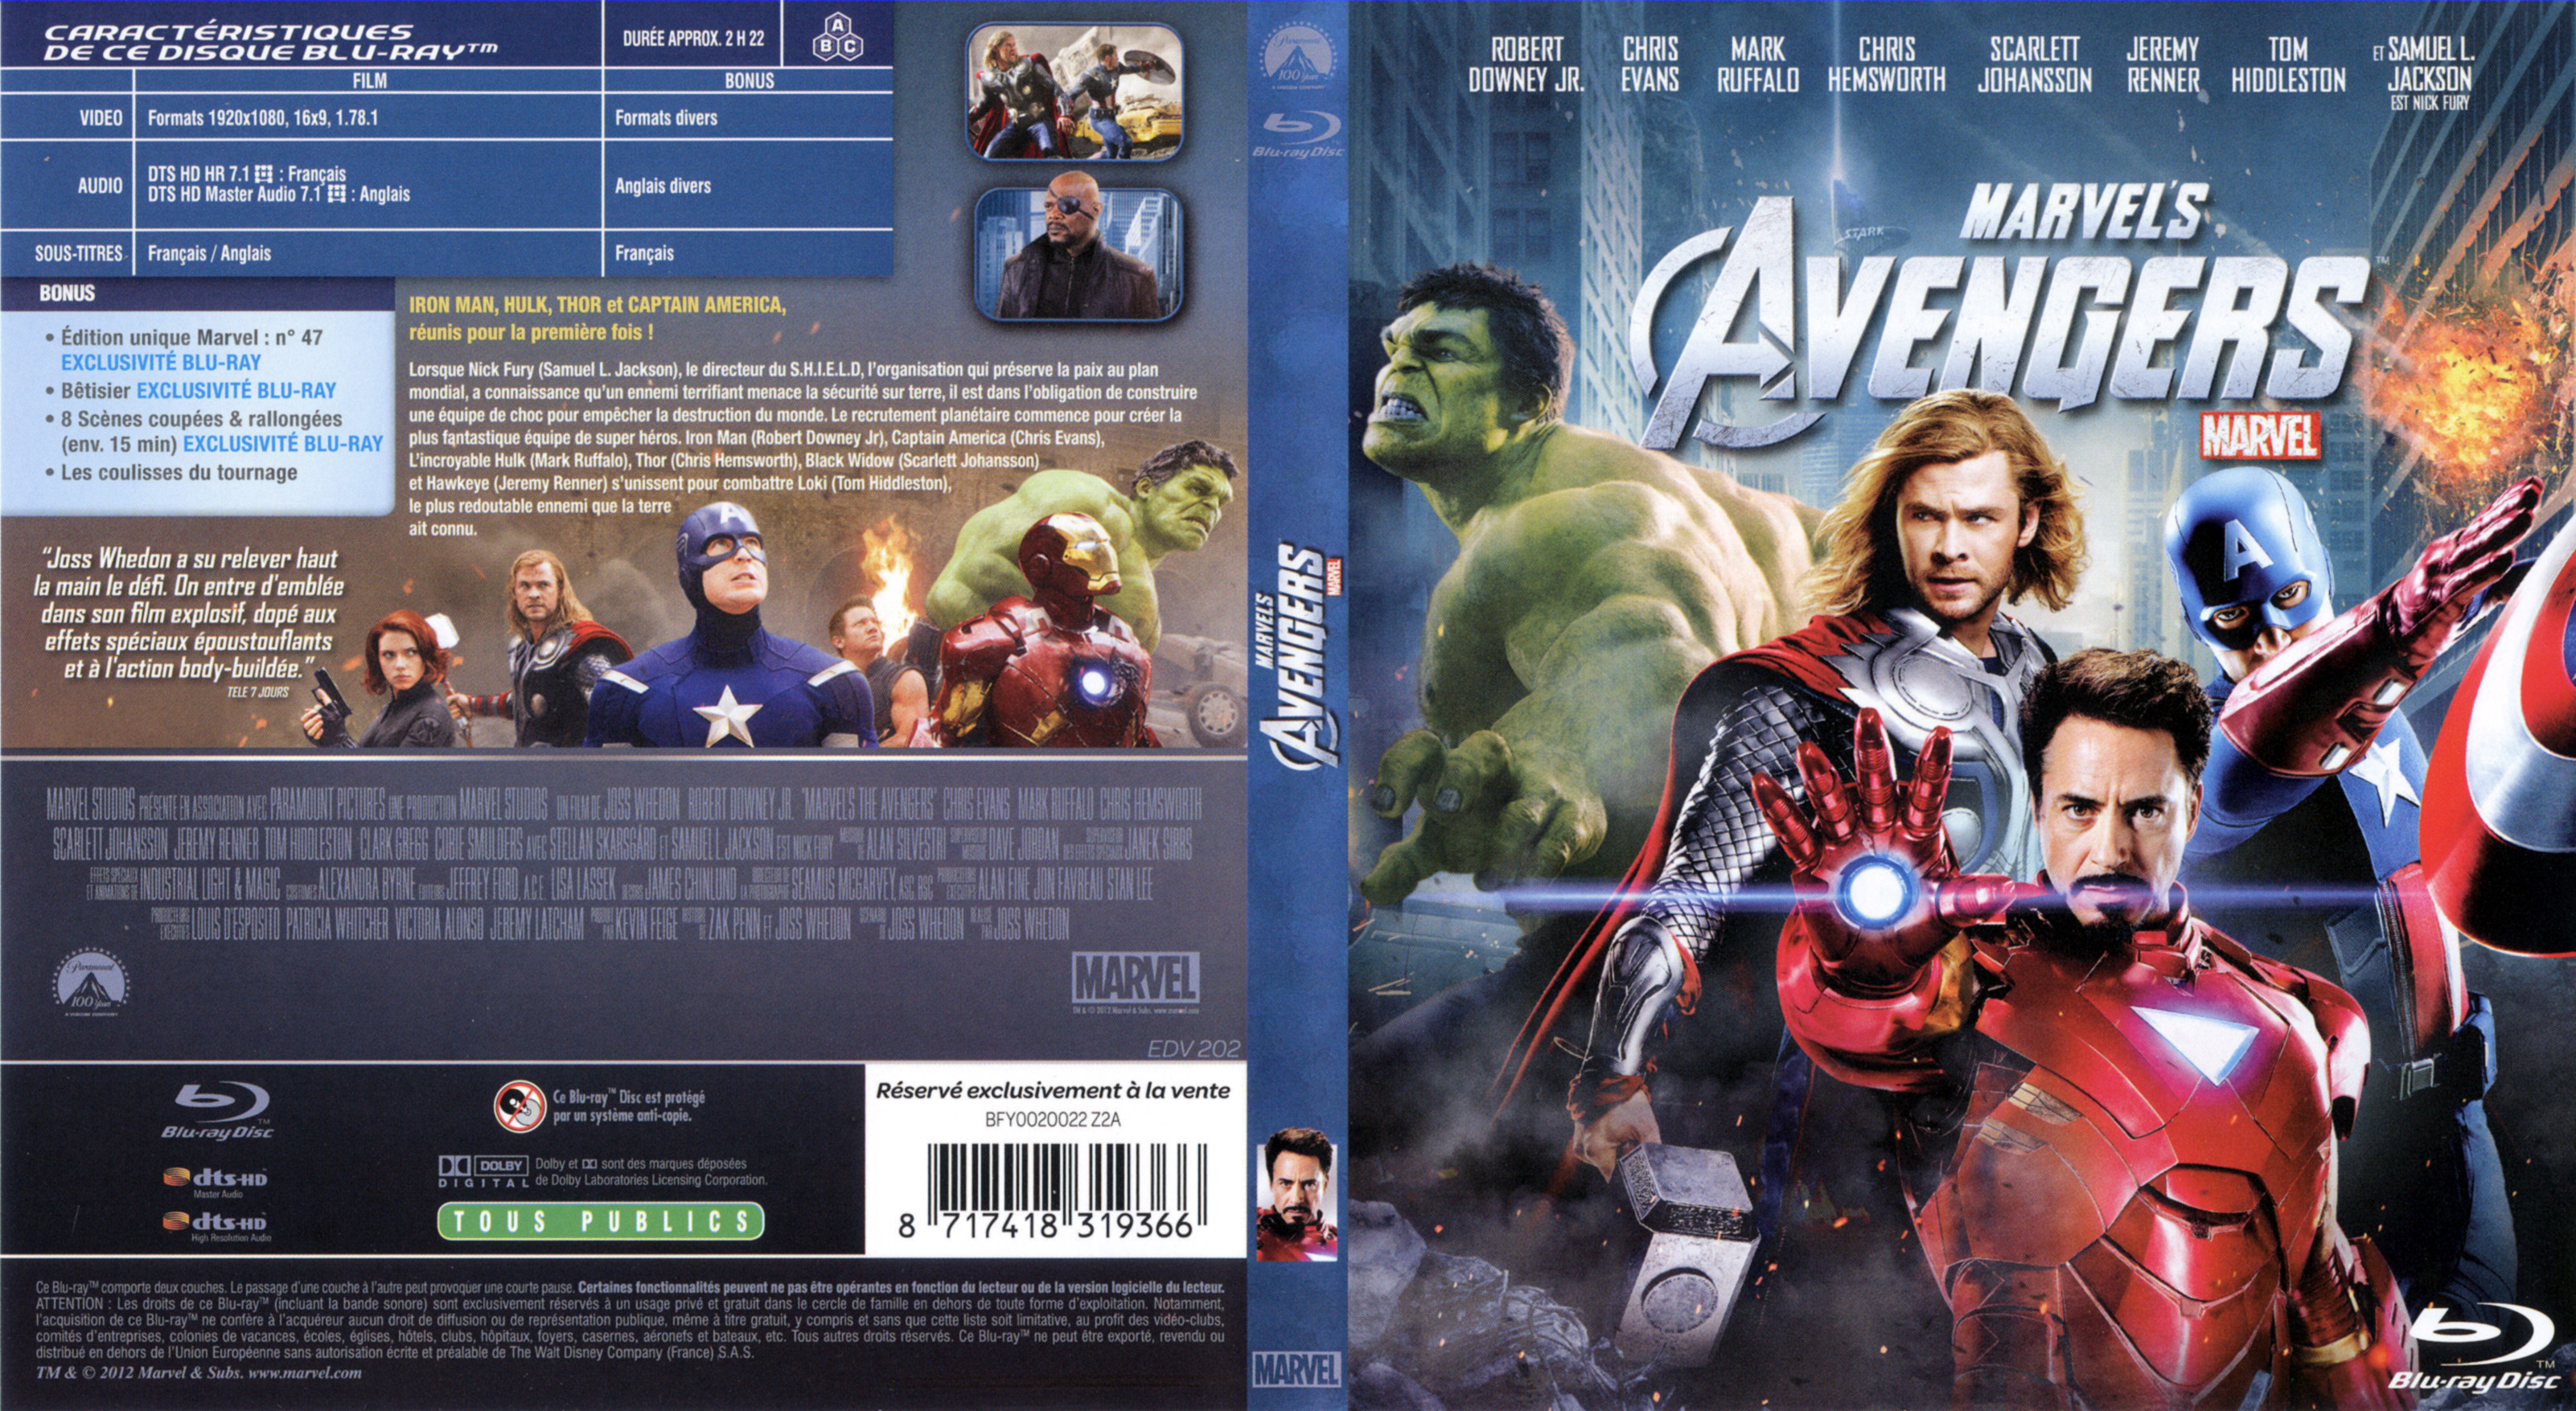 Jaquette DVD Avengers (BLU-RAY)